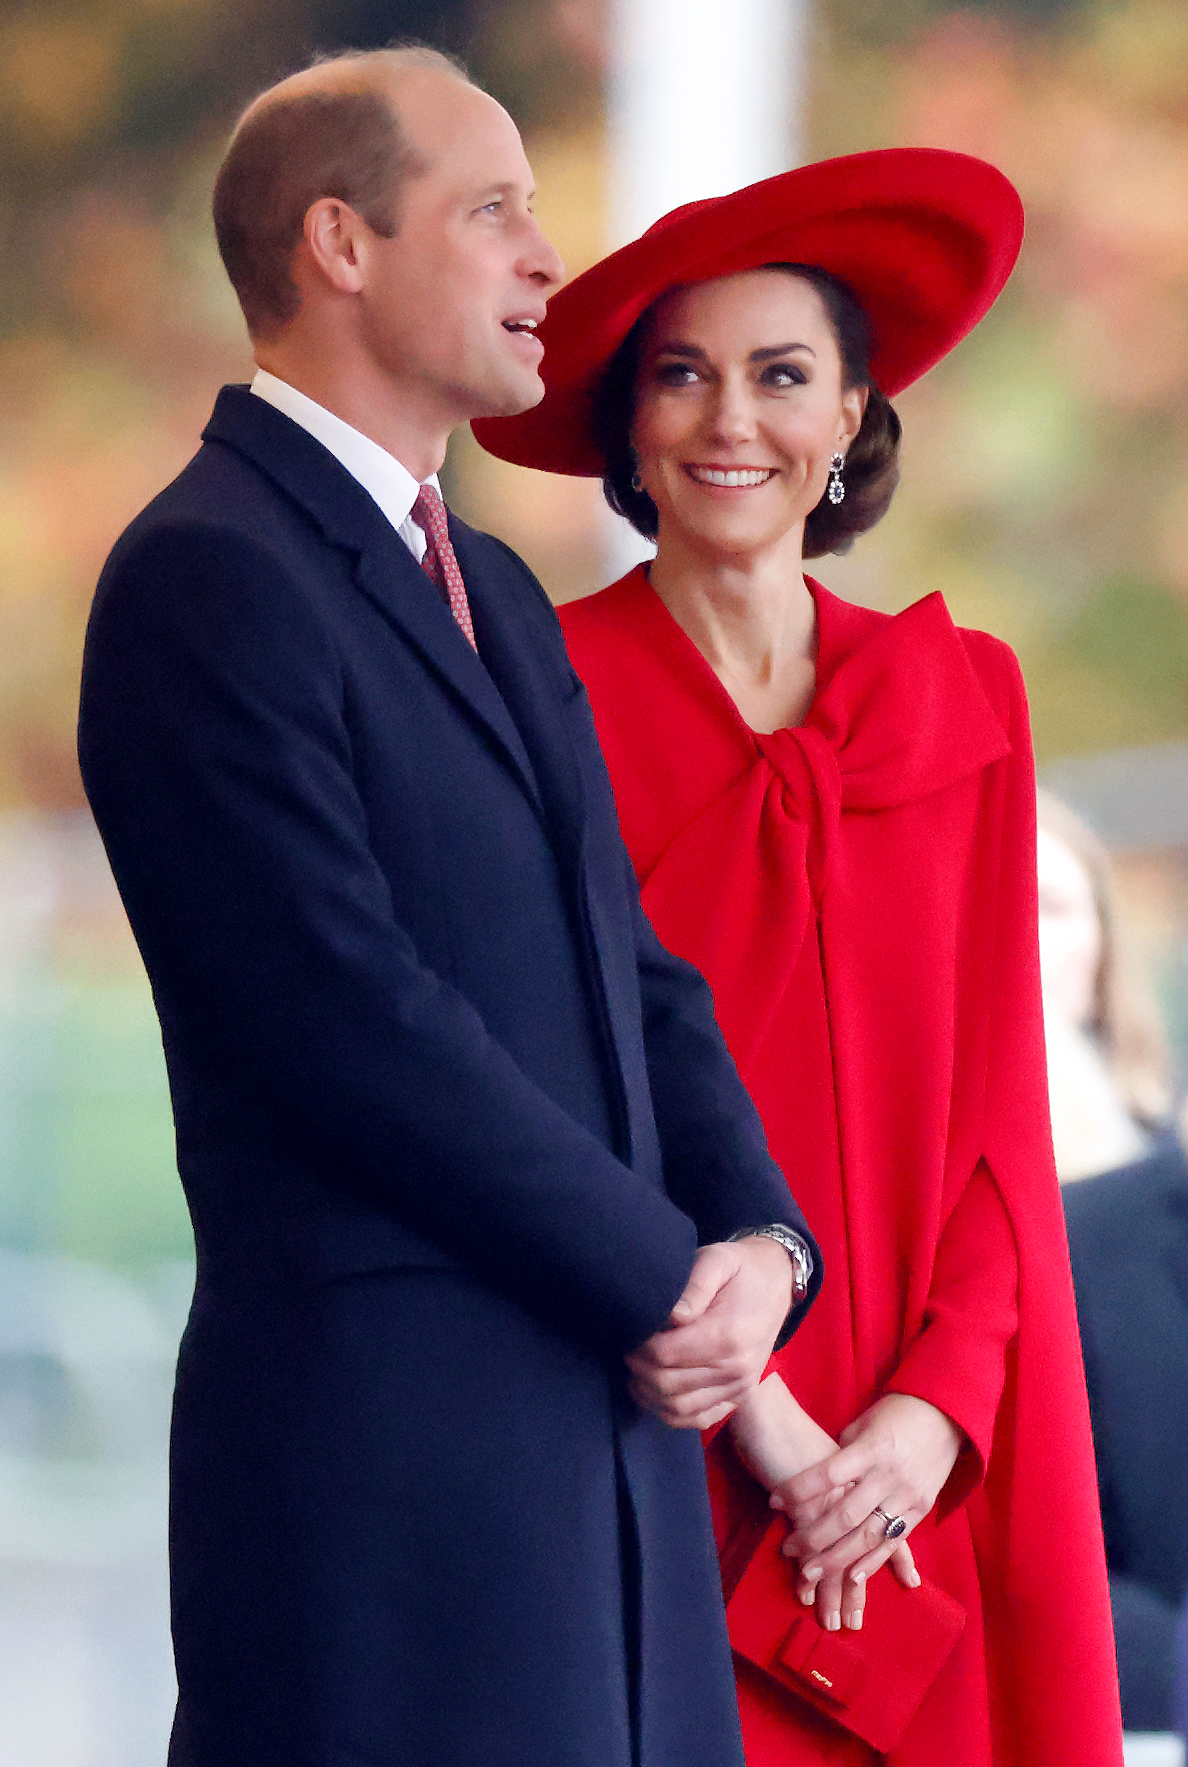 Prince William and Kate Middleton smiling, Kate in a red hat and matching coat with a bow